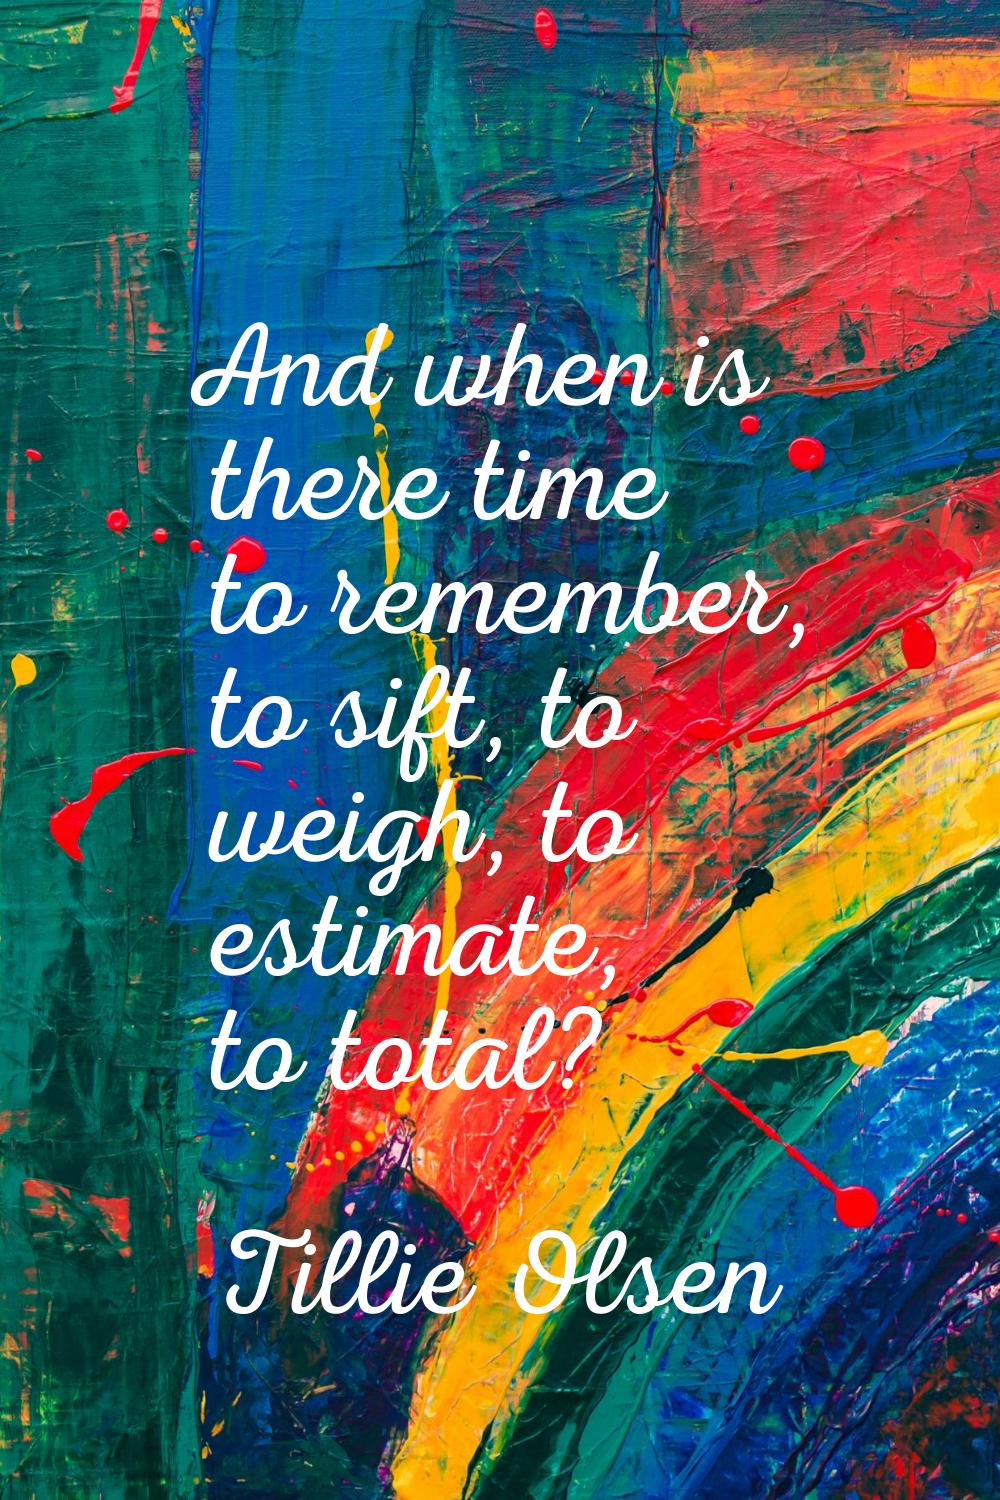 And when is there time to remember, to sift, to weigh, to estimate, to total?